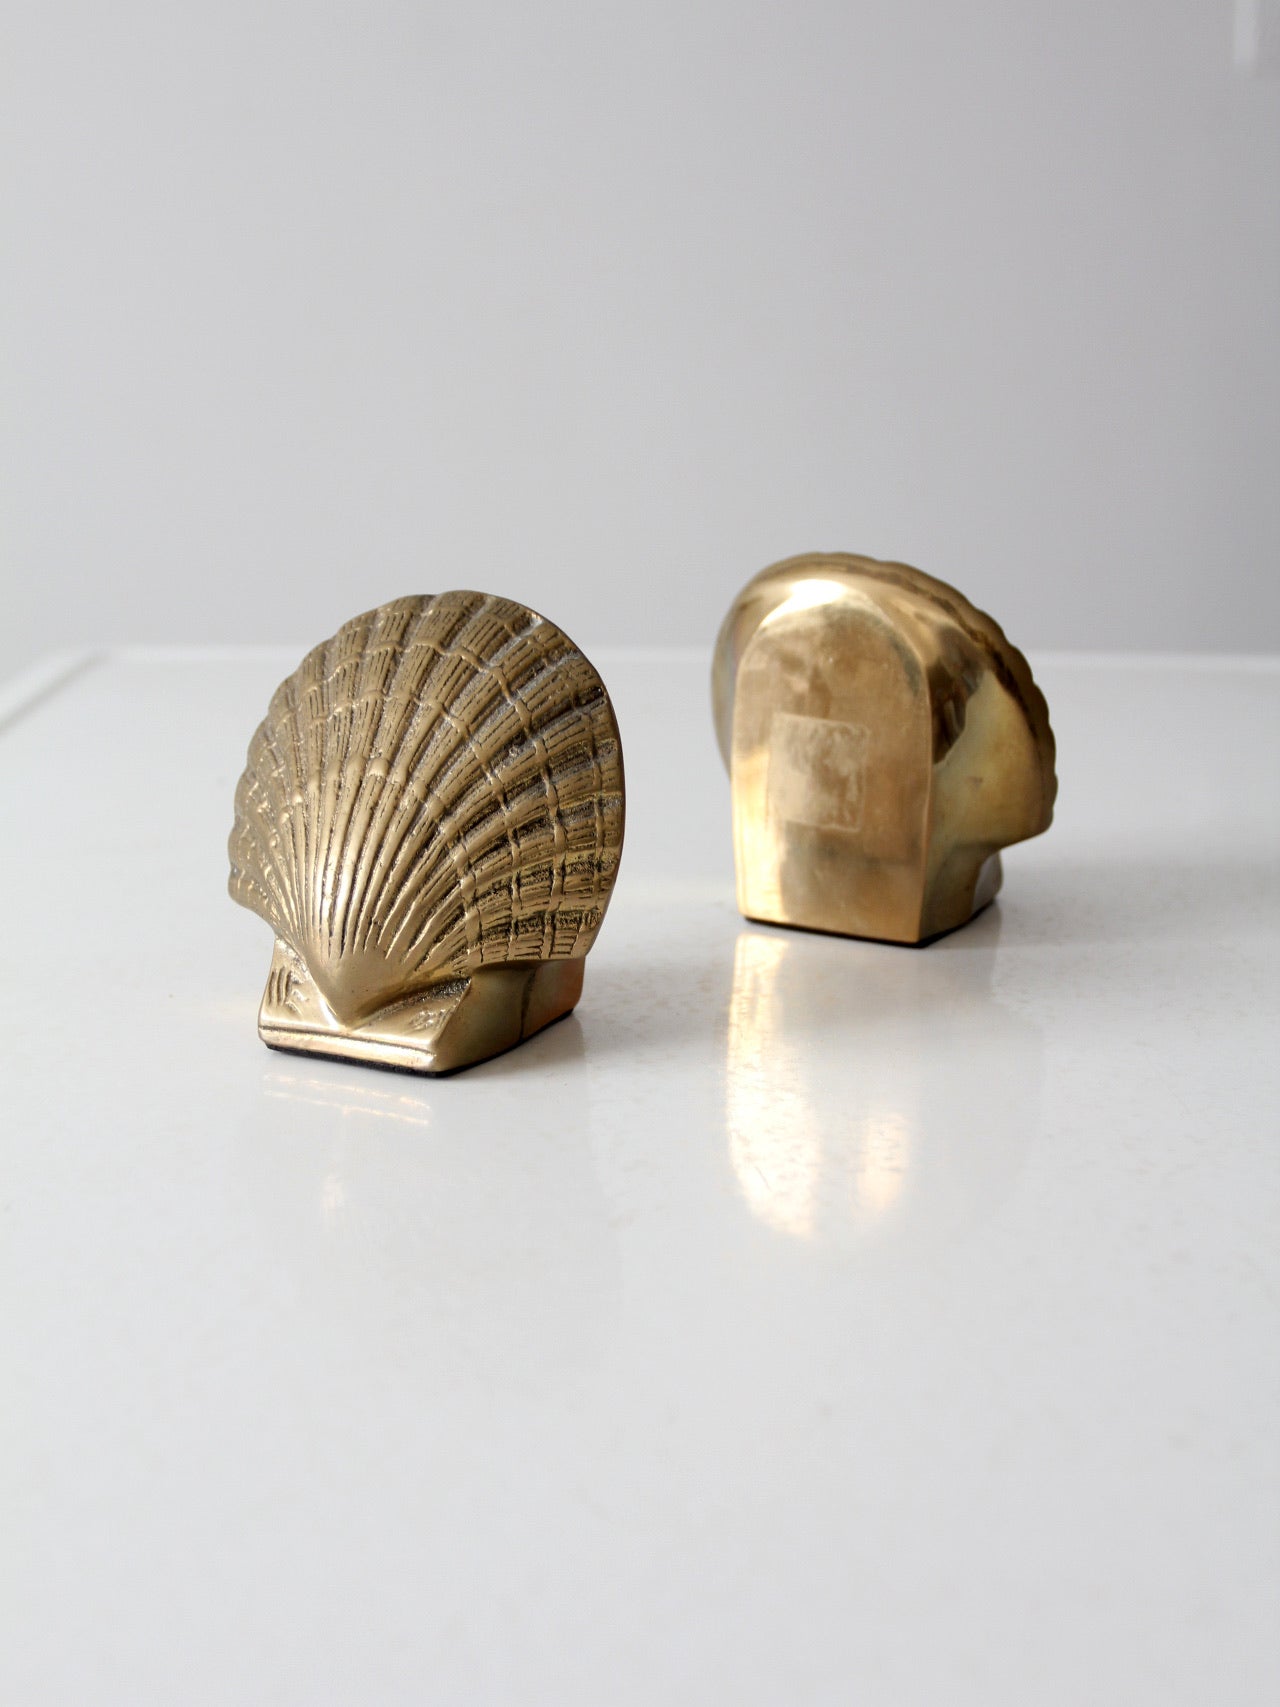 Vintage 1970s Mid Century Solid Brass Seashell Clam Bookends